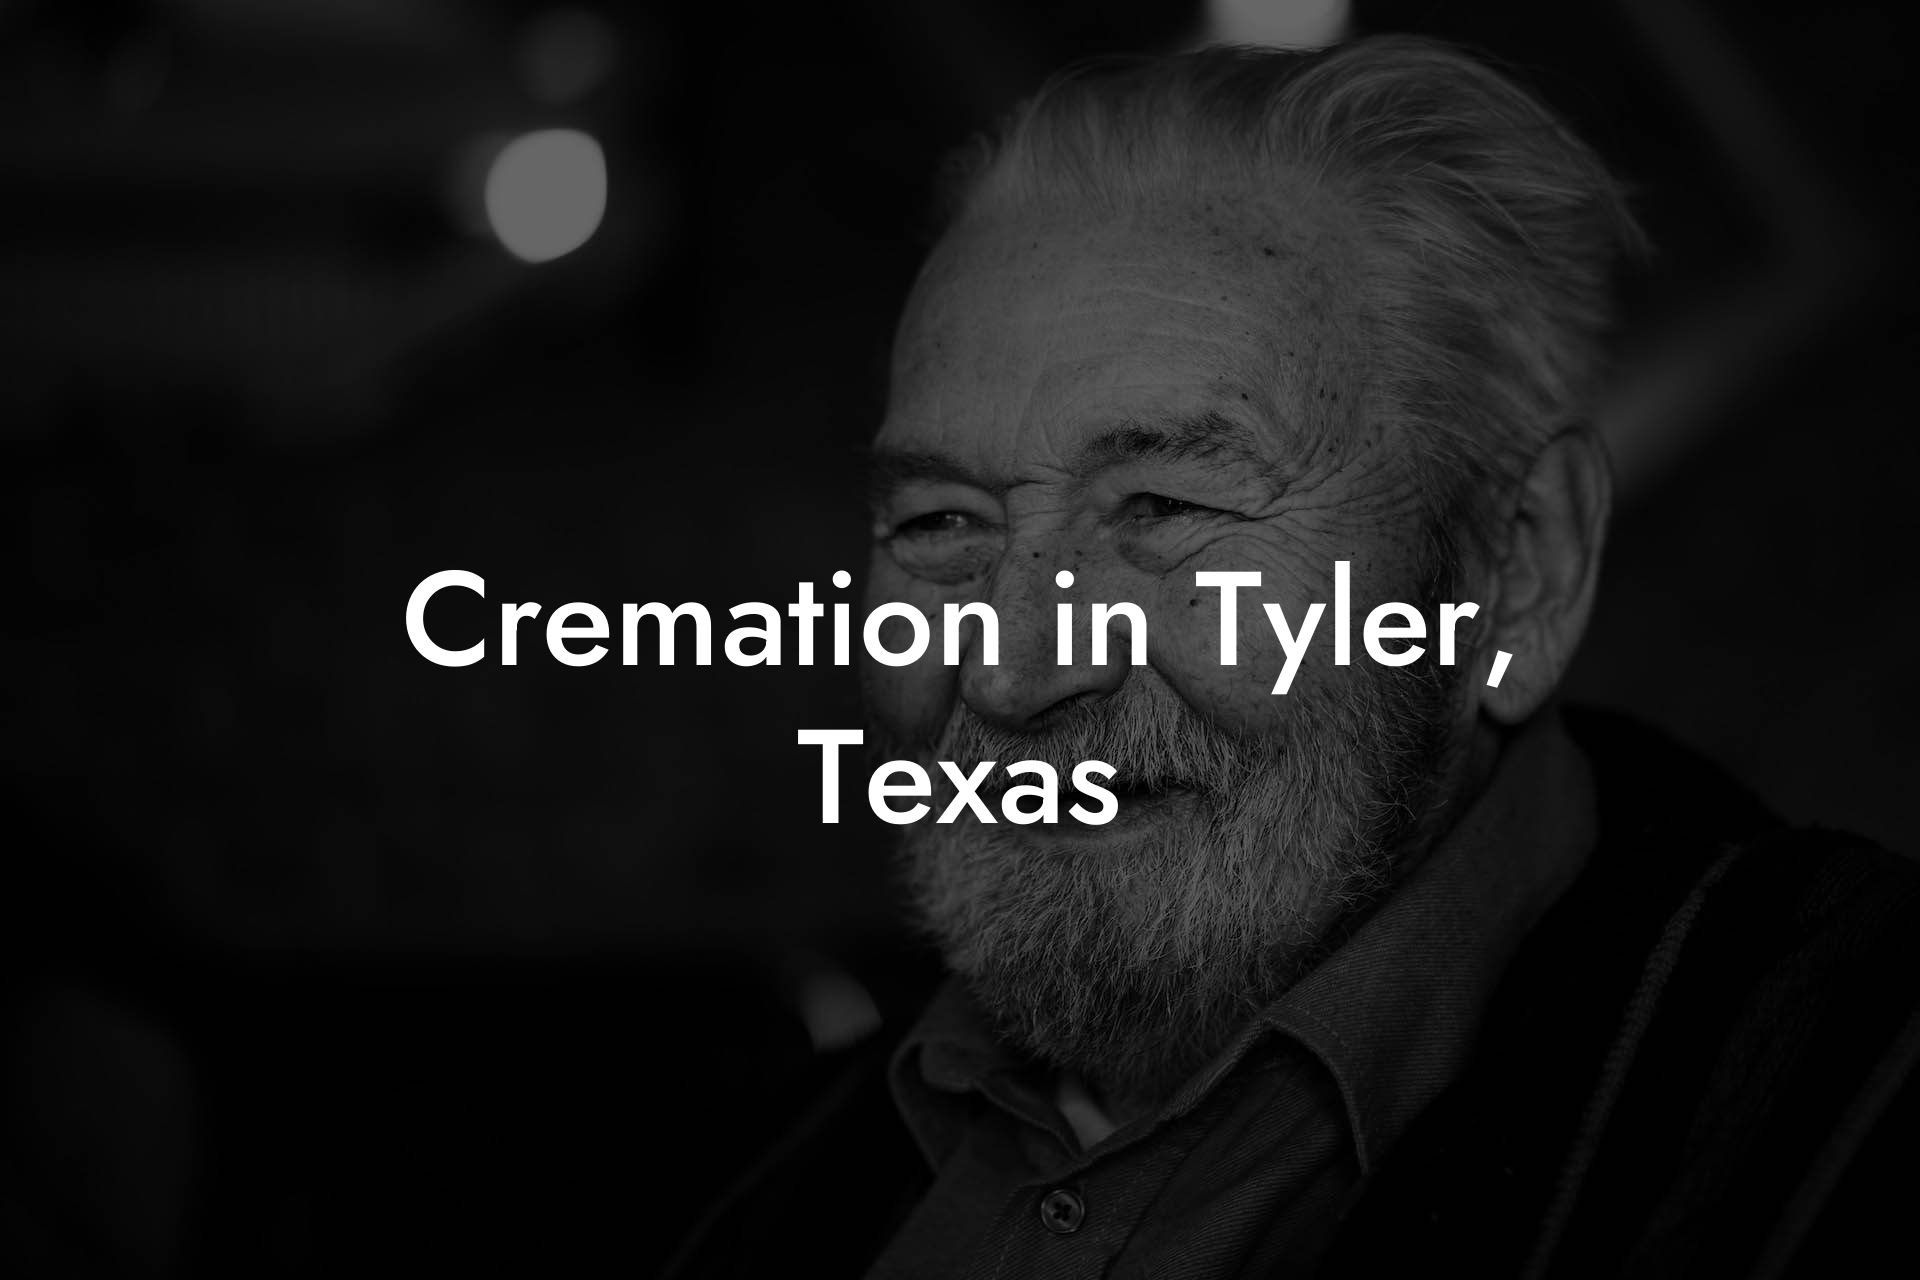 Cremation in Tyler, Texas